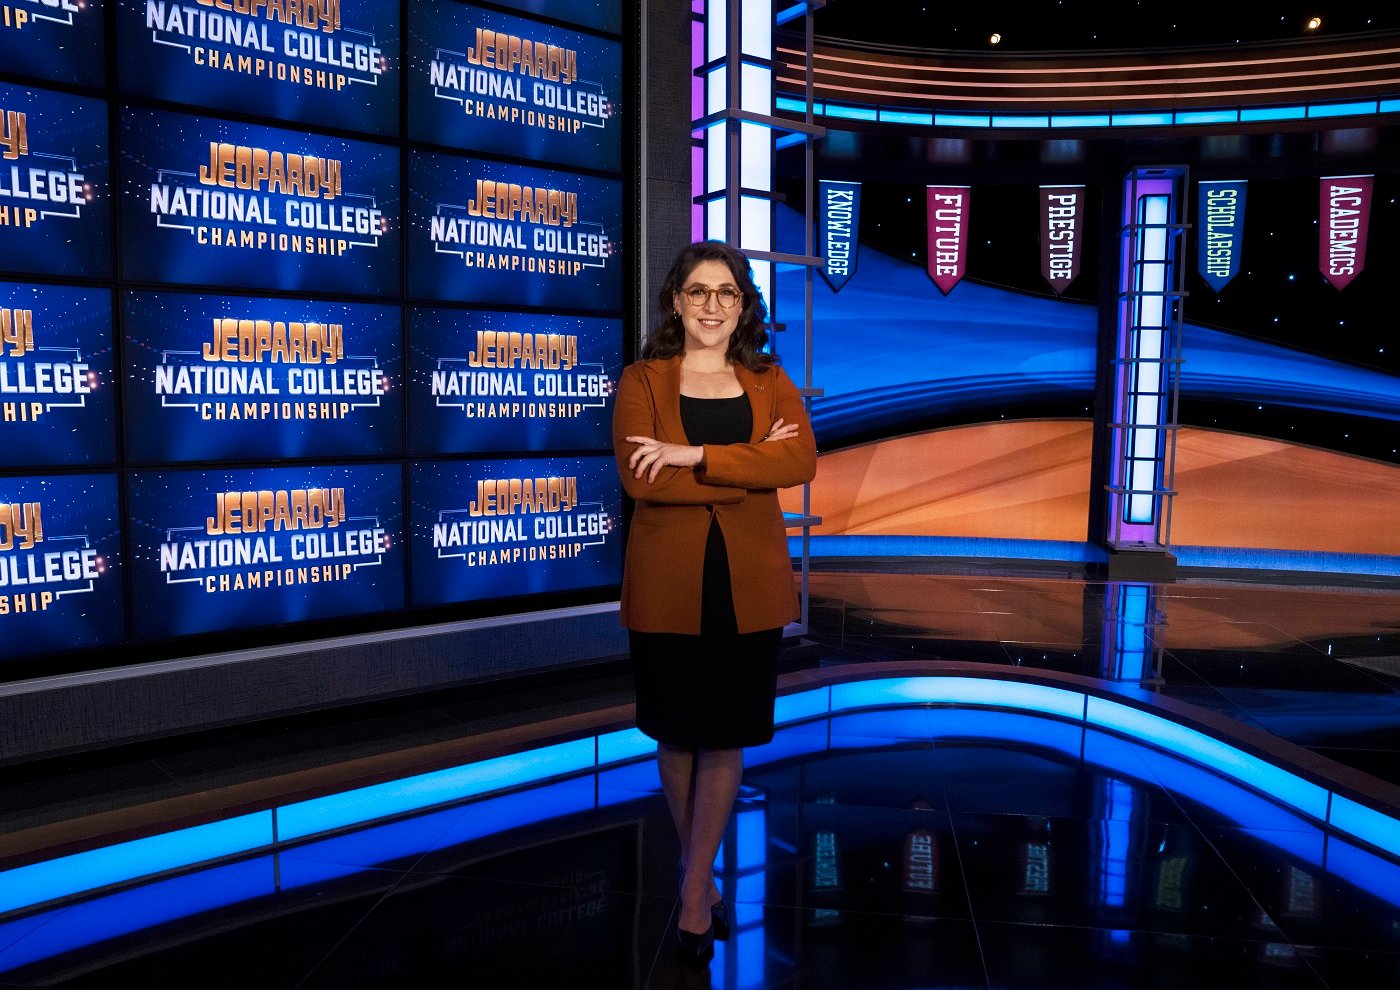 Mayim Bialik stands in front of the Jeopardy! board during the 'national College Championship'